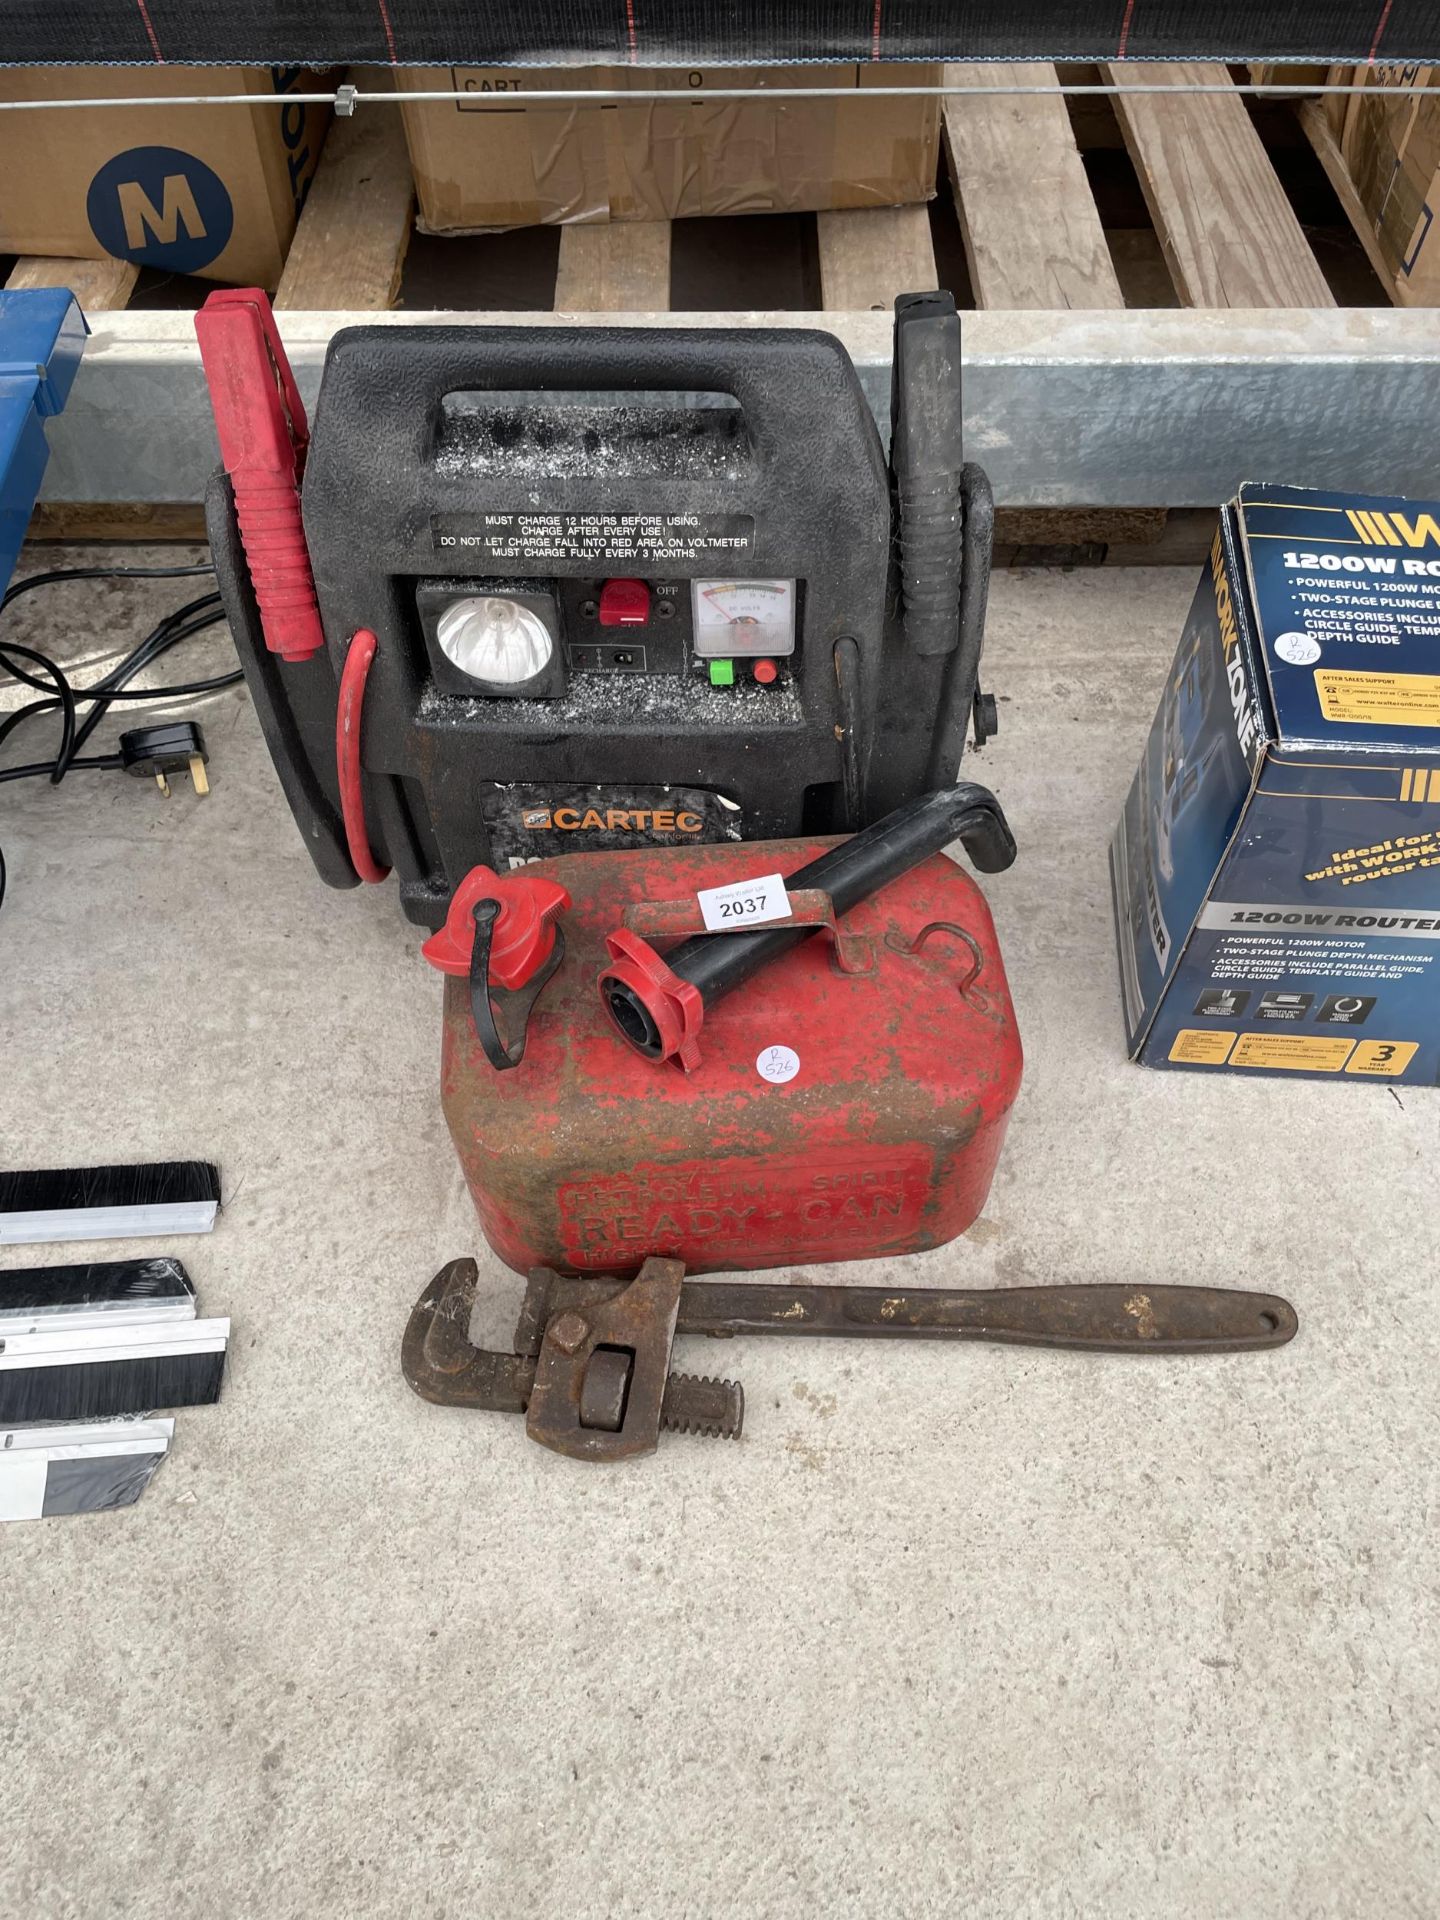 AN ASSORTMENT OF TOOLS TO INCLUDE A FUEL CAN AND A CAR CHARGER ETC